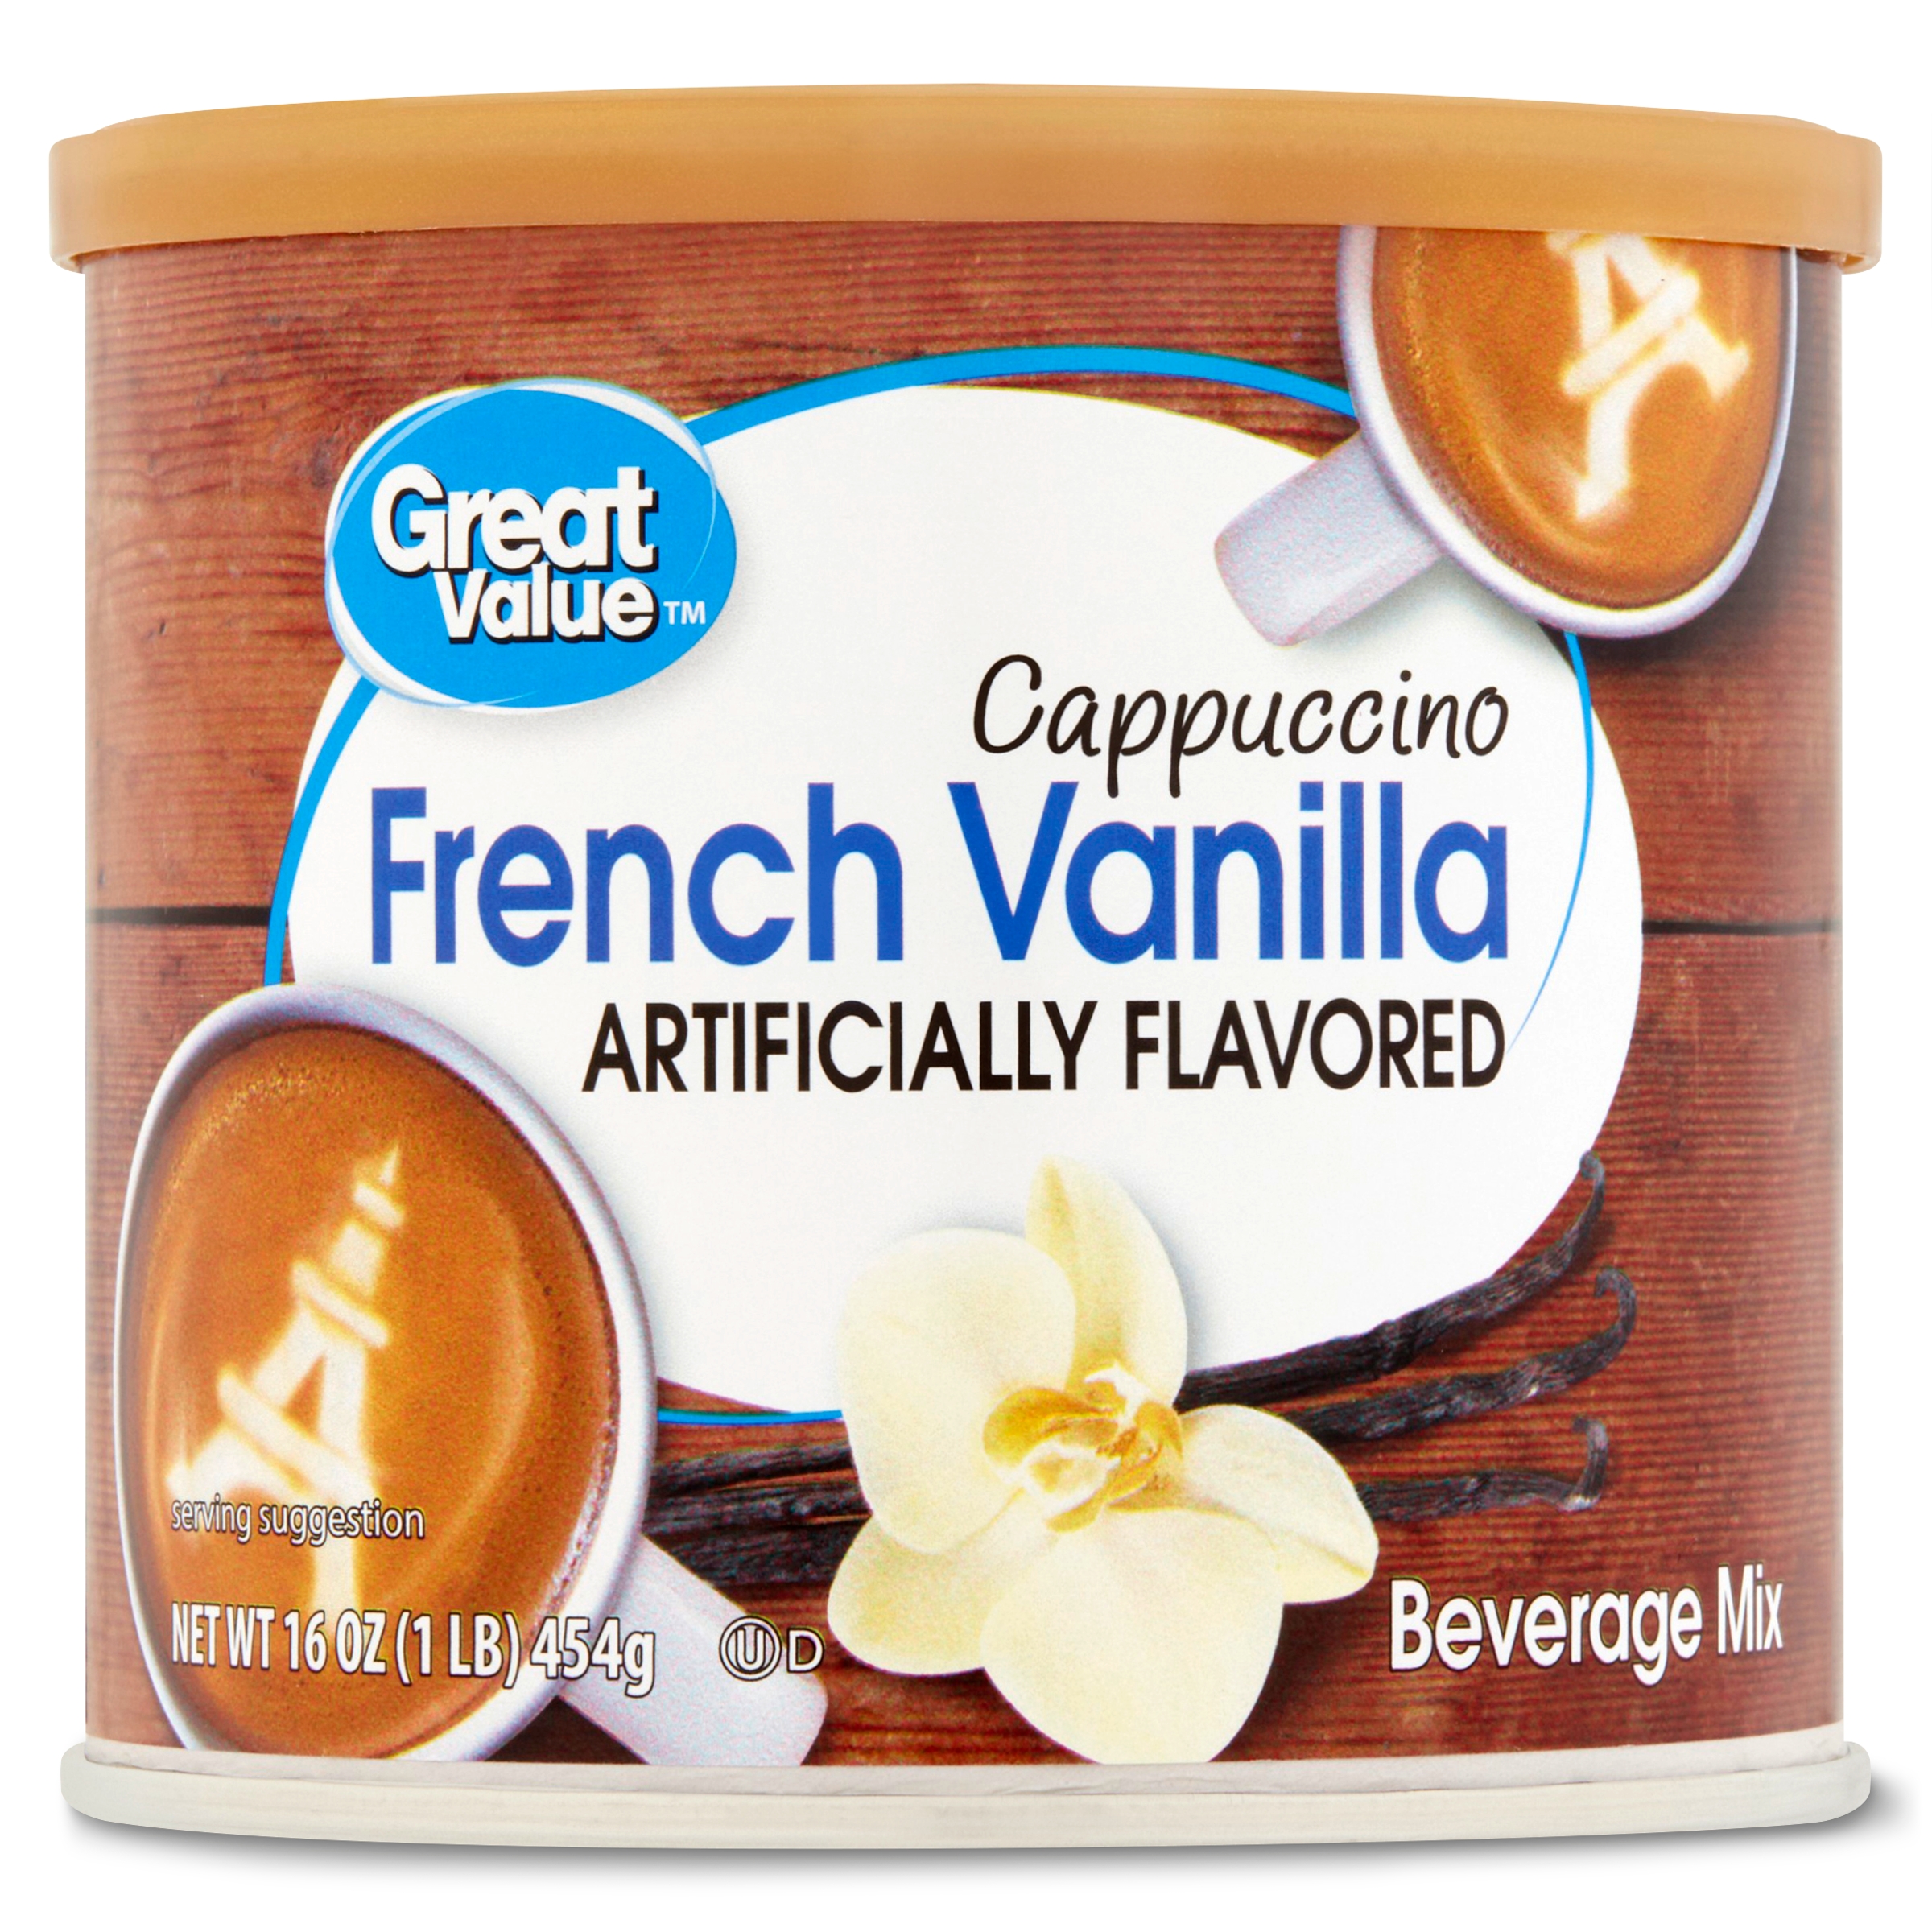 Great Value French Vanilla Cappuccino Coffee House Beverage Drink Mix, 16 oz Canister - image 1 of 9